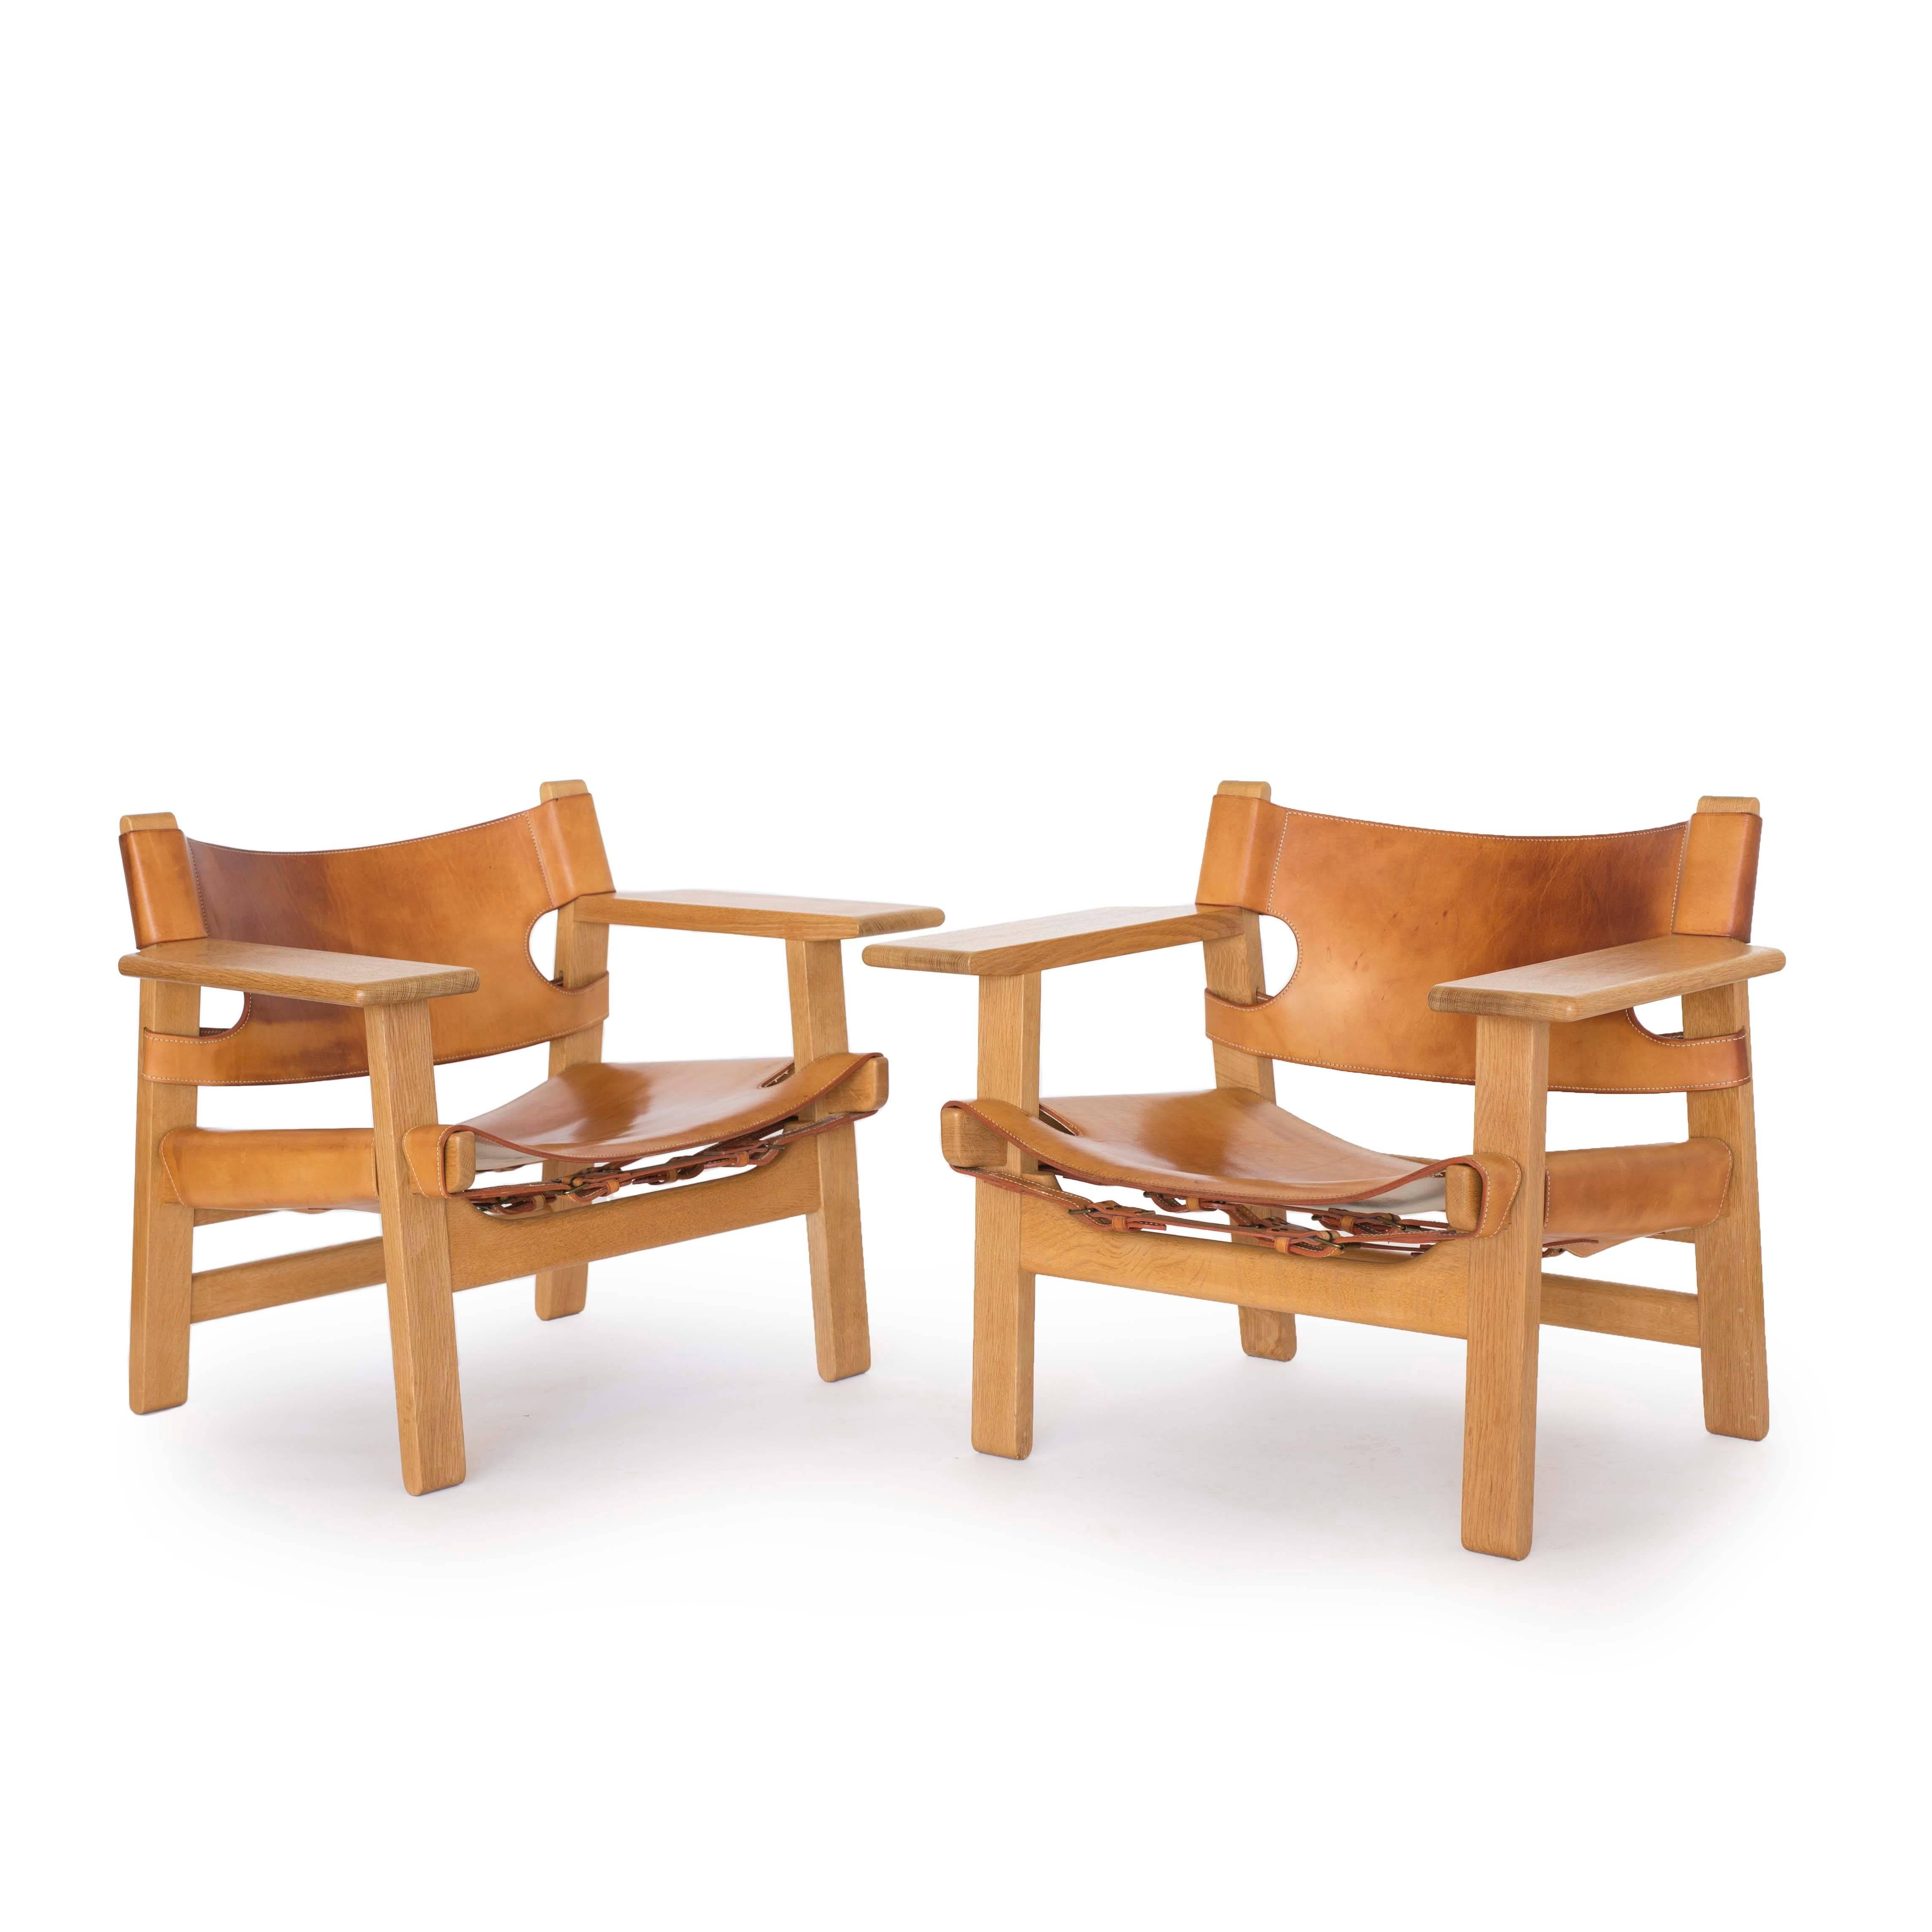 A pair of Børge Mogensen 'The Spanish chair' with frame of oak, seat and back with natural patinated butt leather. 

Designed 1958, manufactured by Fredericia Stolefabrik, Denmark, model 2226.

 